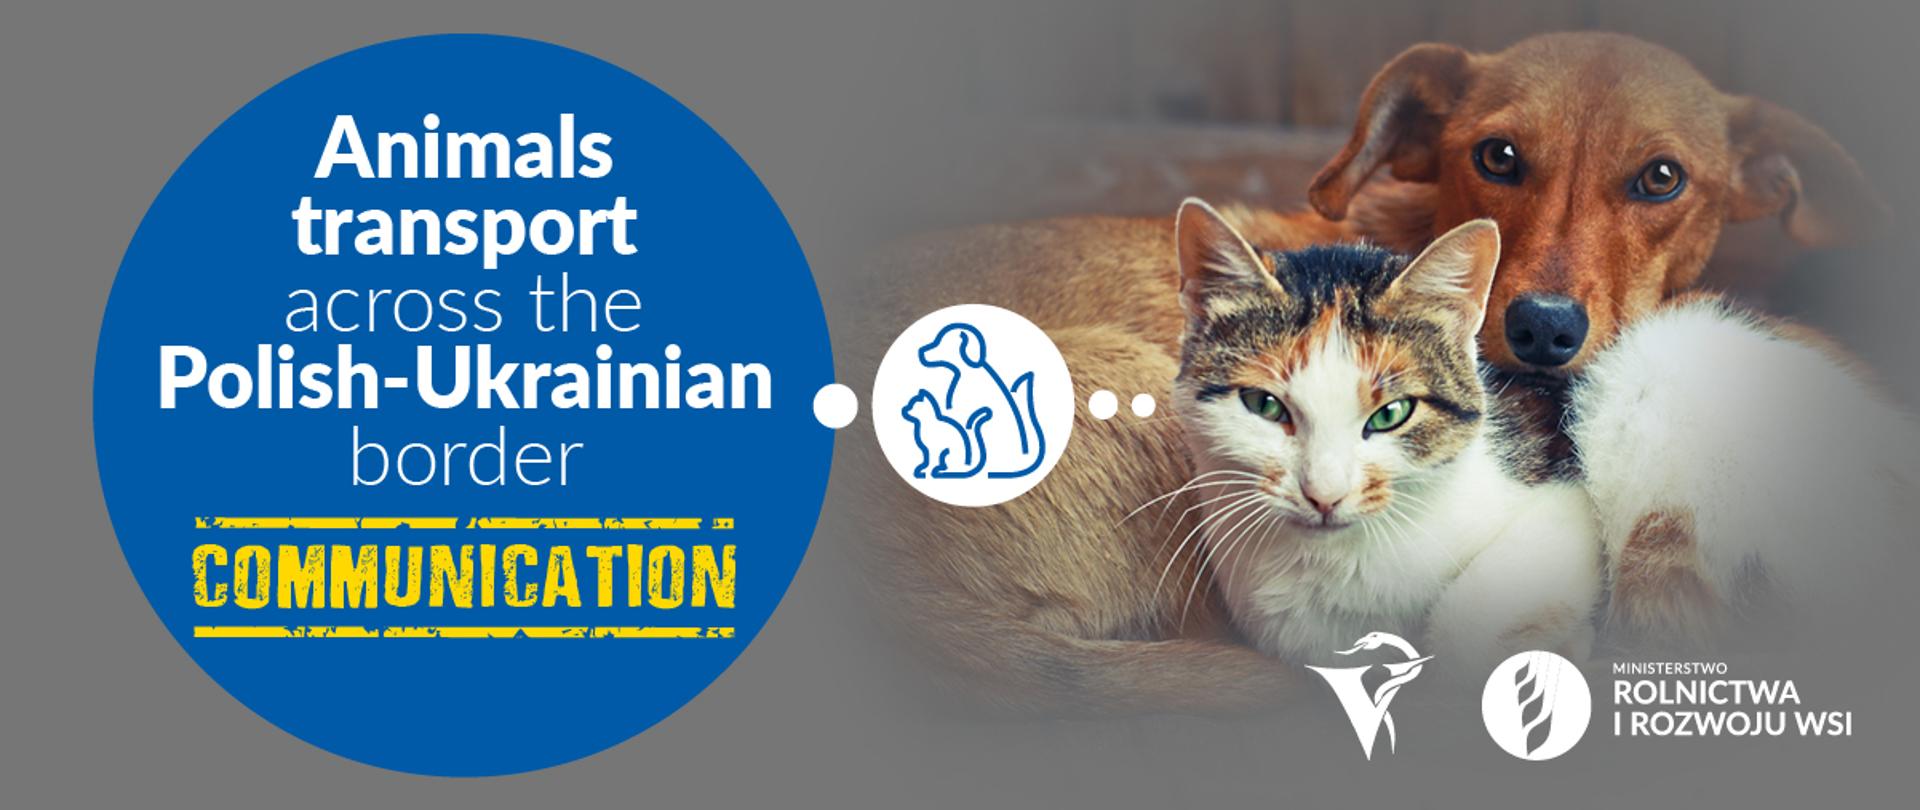 Assistance in transporting animals from Ukraine to Poland